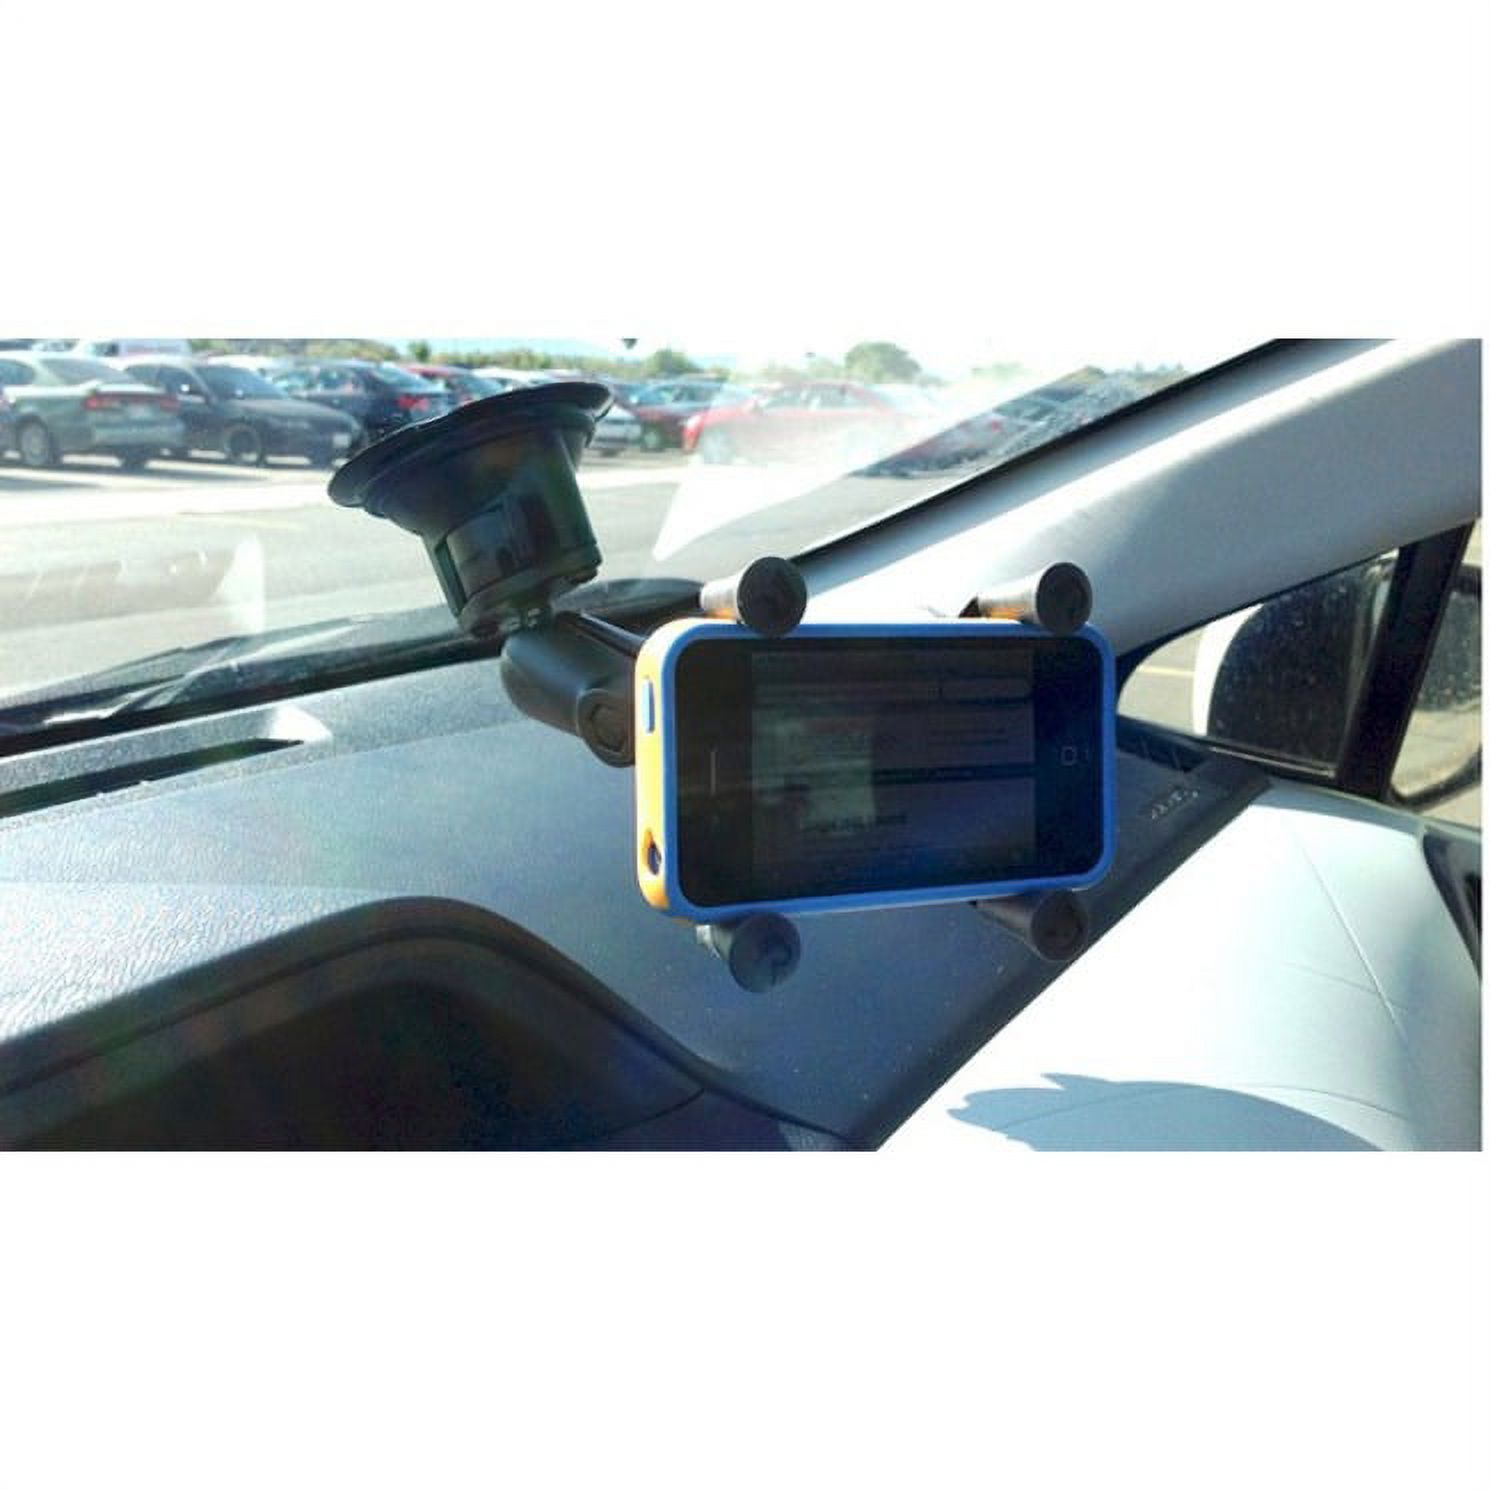 Ram Twist Lock Suction Cup Mount with Universal X-Grip Cell Phone holder - image 4 of 9